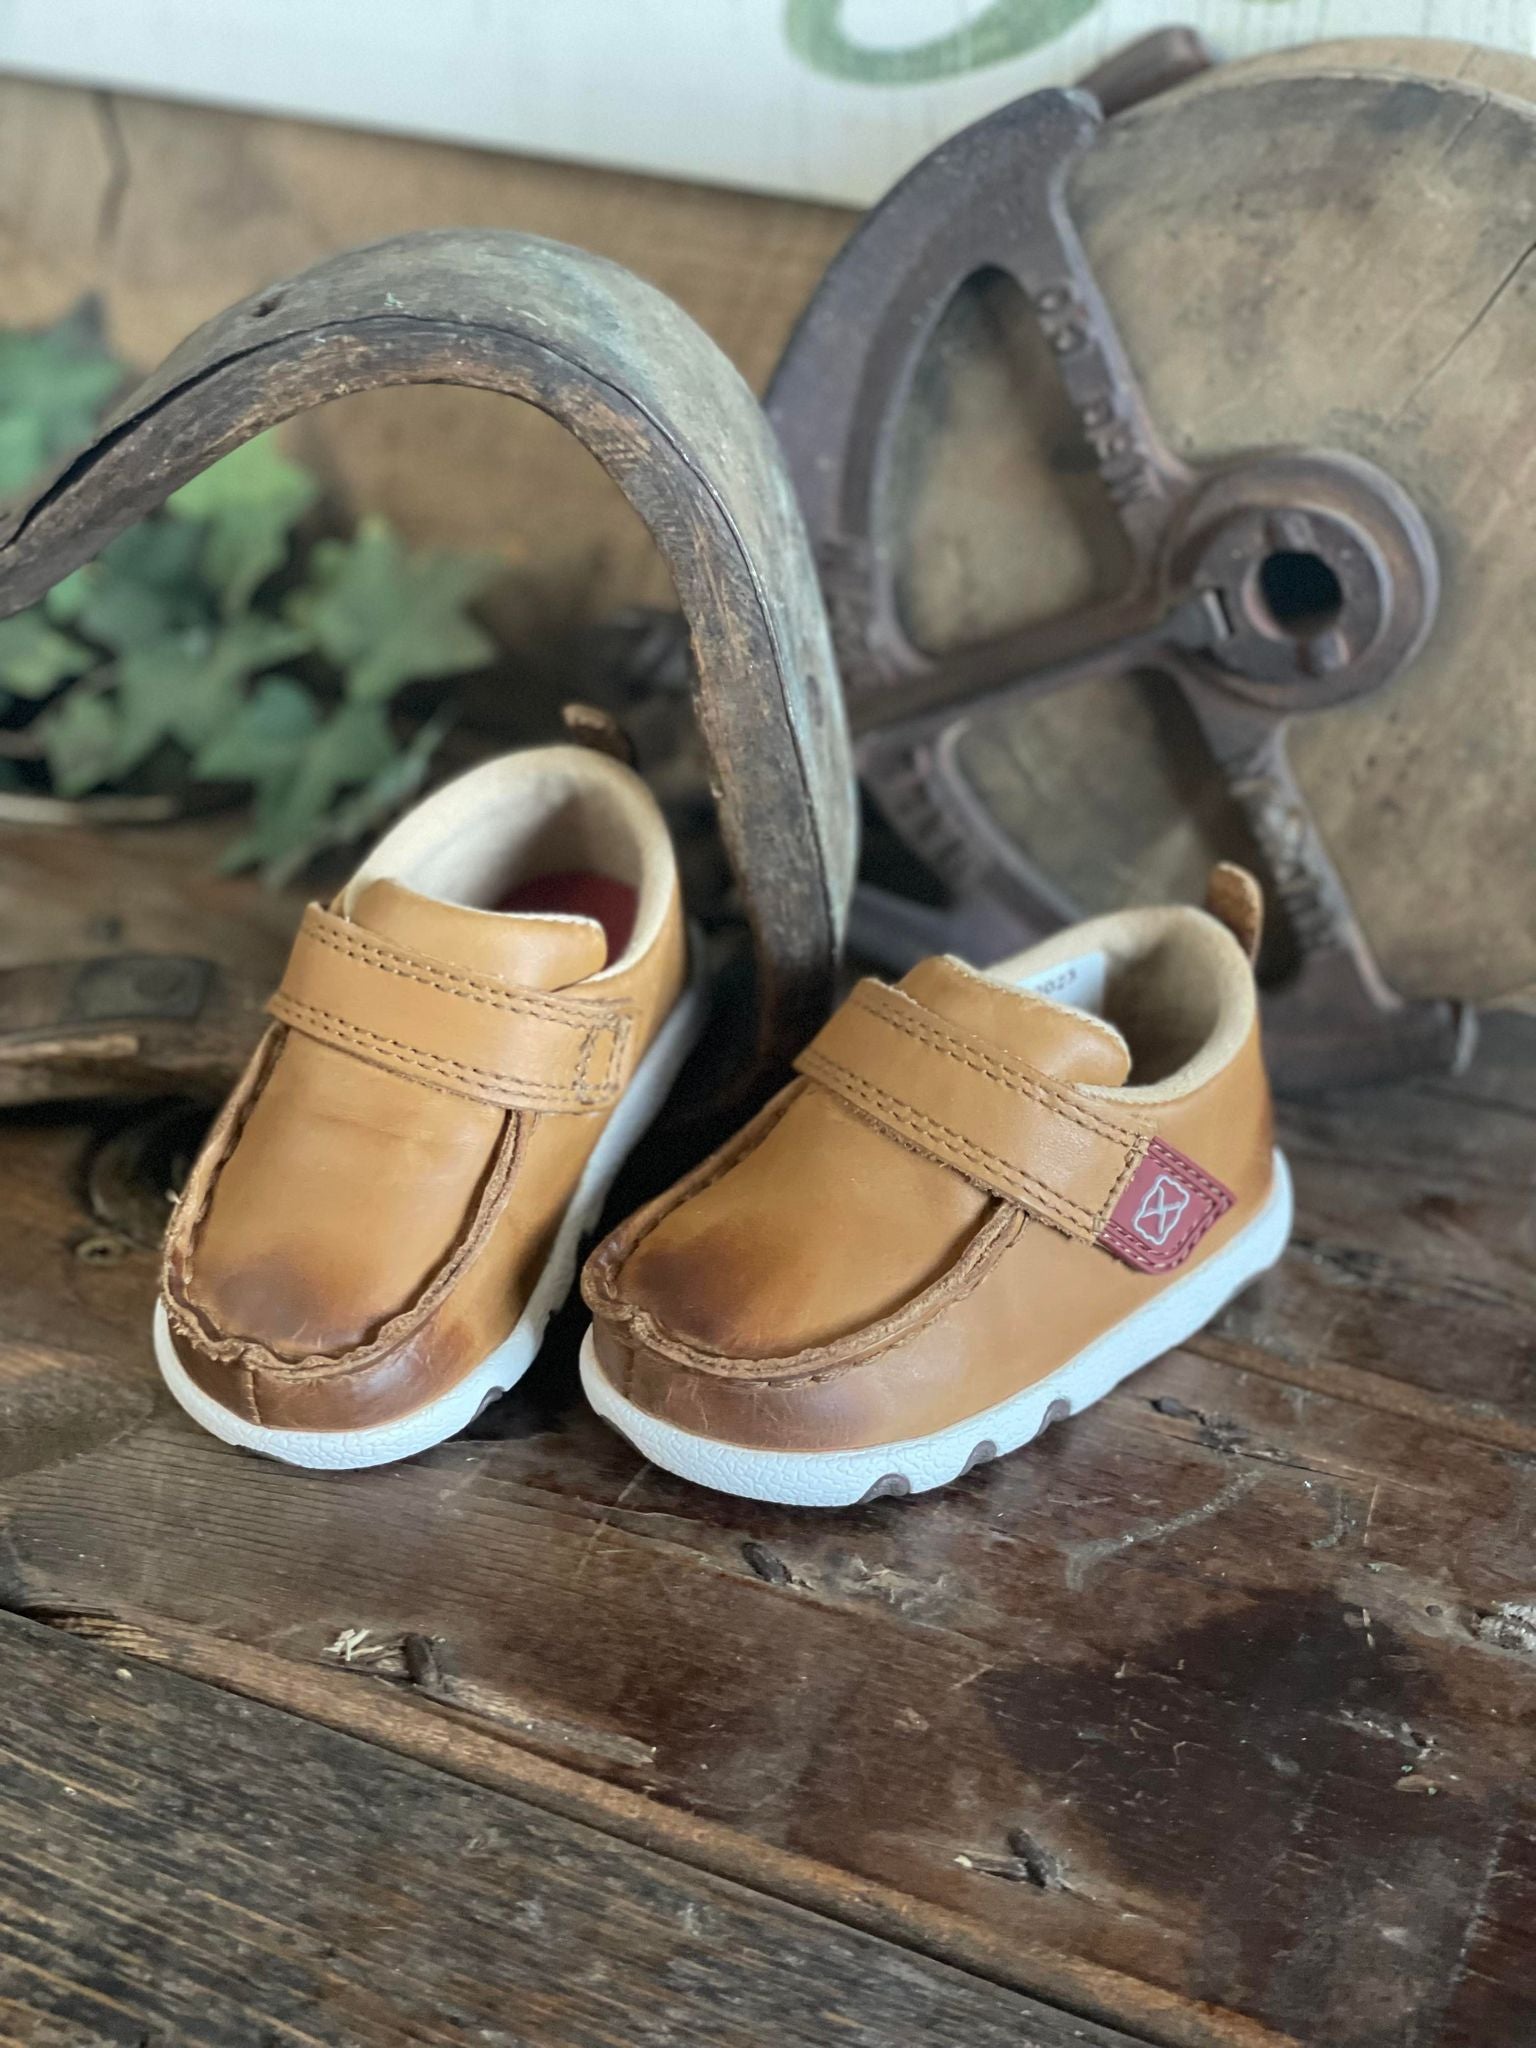 Infant Twisted X Distressed Leather Moc Casual ICA0023-Kids Casual Shoes-Twisted X Boots-Lucky J Boots & More, Women's, Men's, & Kids Western Store Located in Carthage, MO